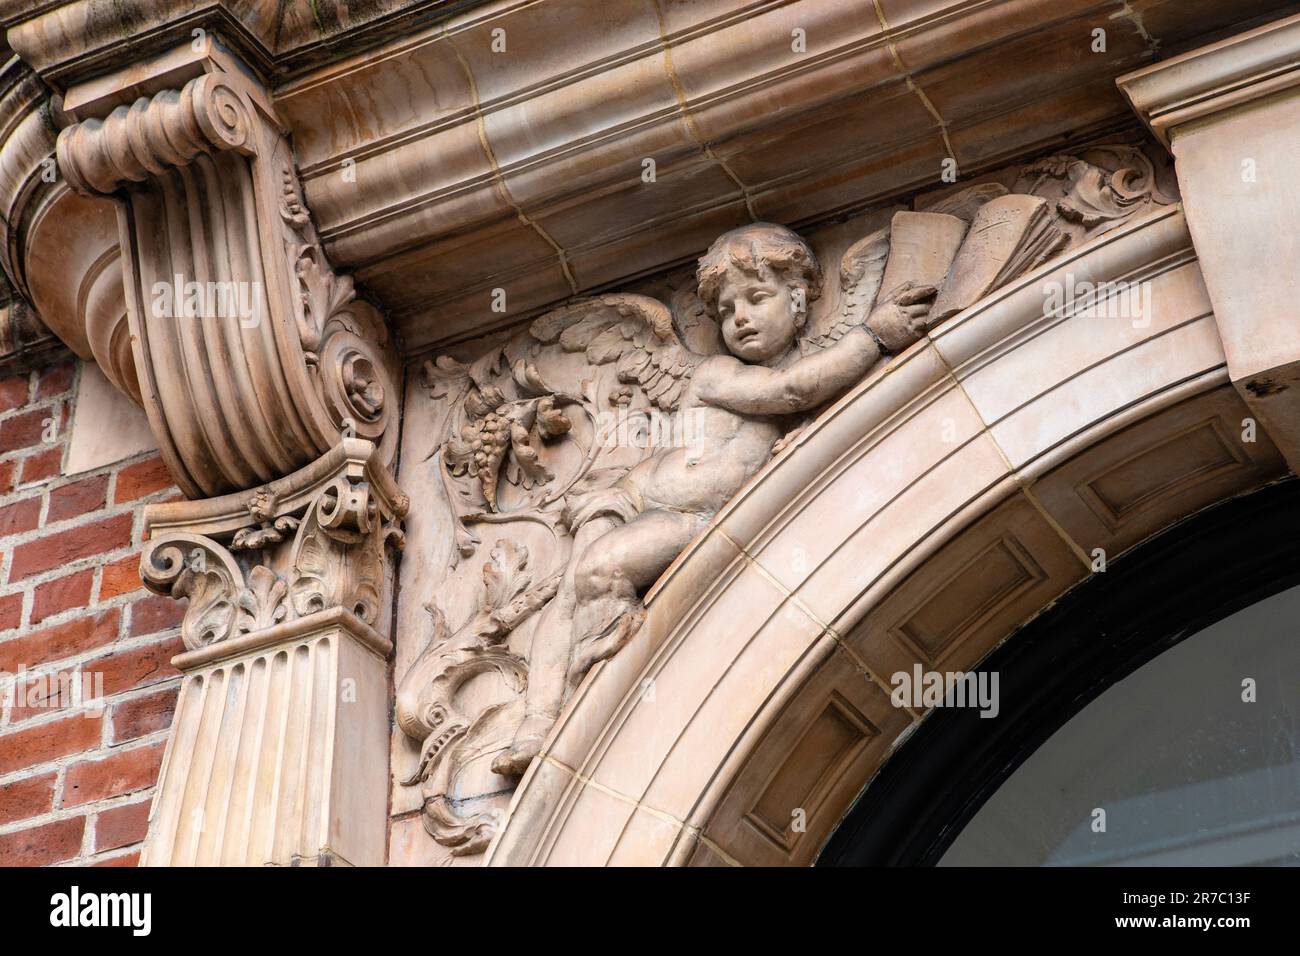 London, UK - March 2nd 2023: The ornate stone sculpture above the entrance sign to the Whitechapel Gallery in London, UK. Stock Photo